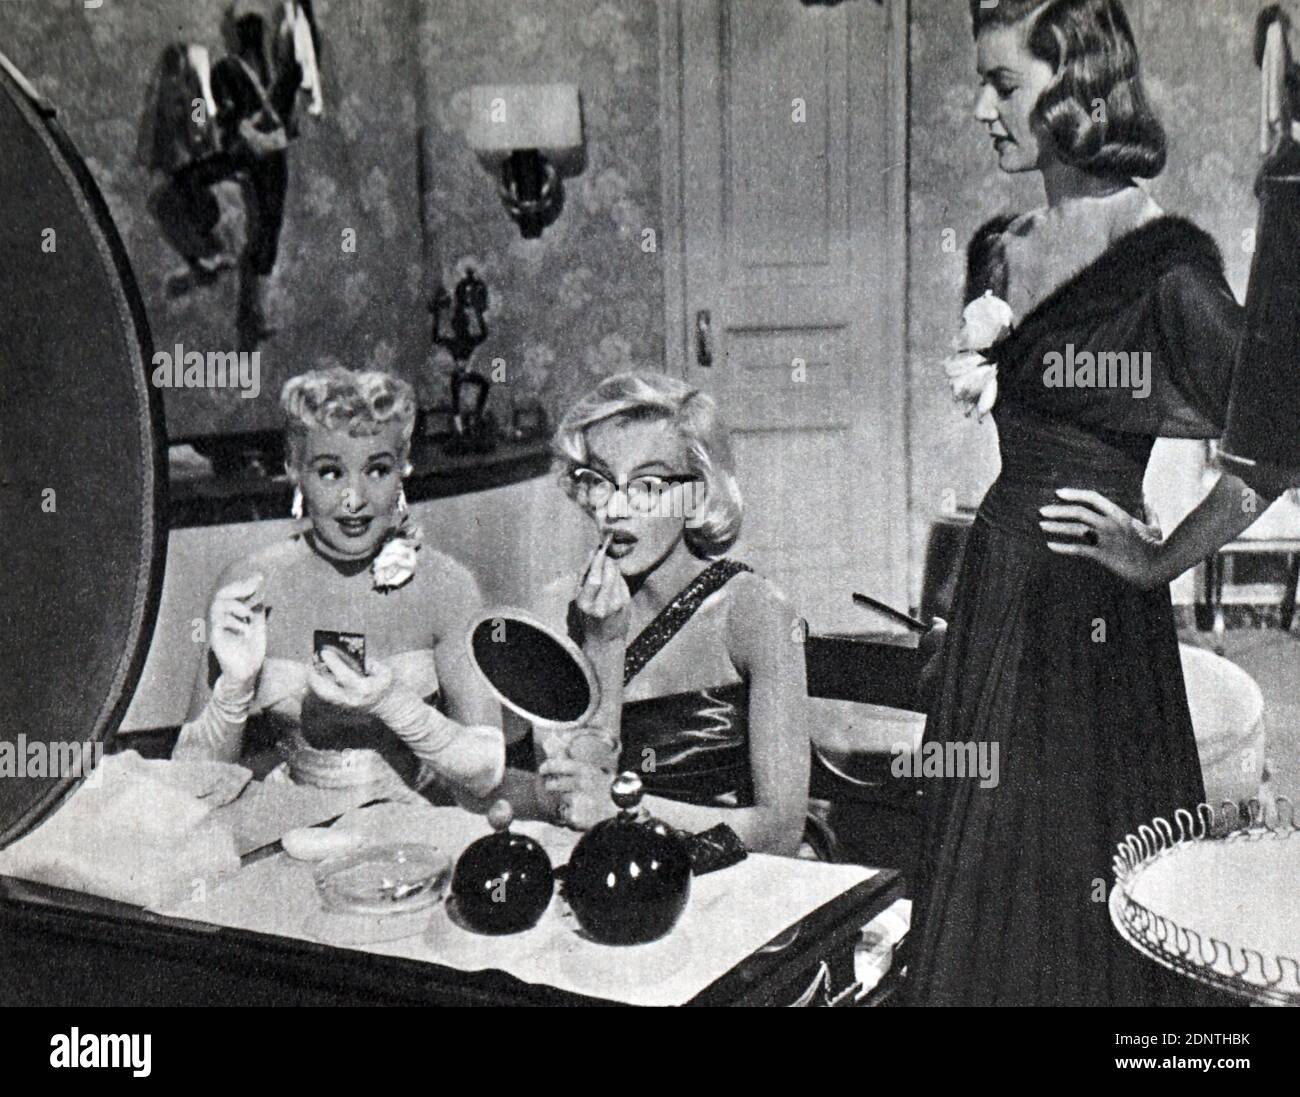 Film still from 'How to Marry a Millionaire' starring Marilyn Monroe, Lauren Bacall, Betty Grable, and Merry Anders. Stock Photo